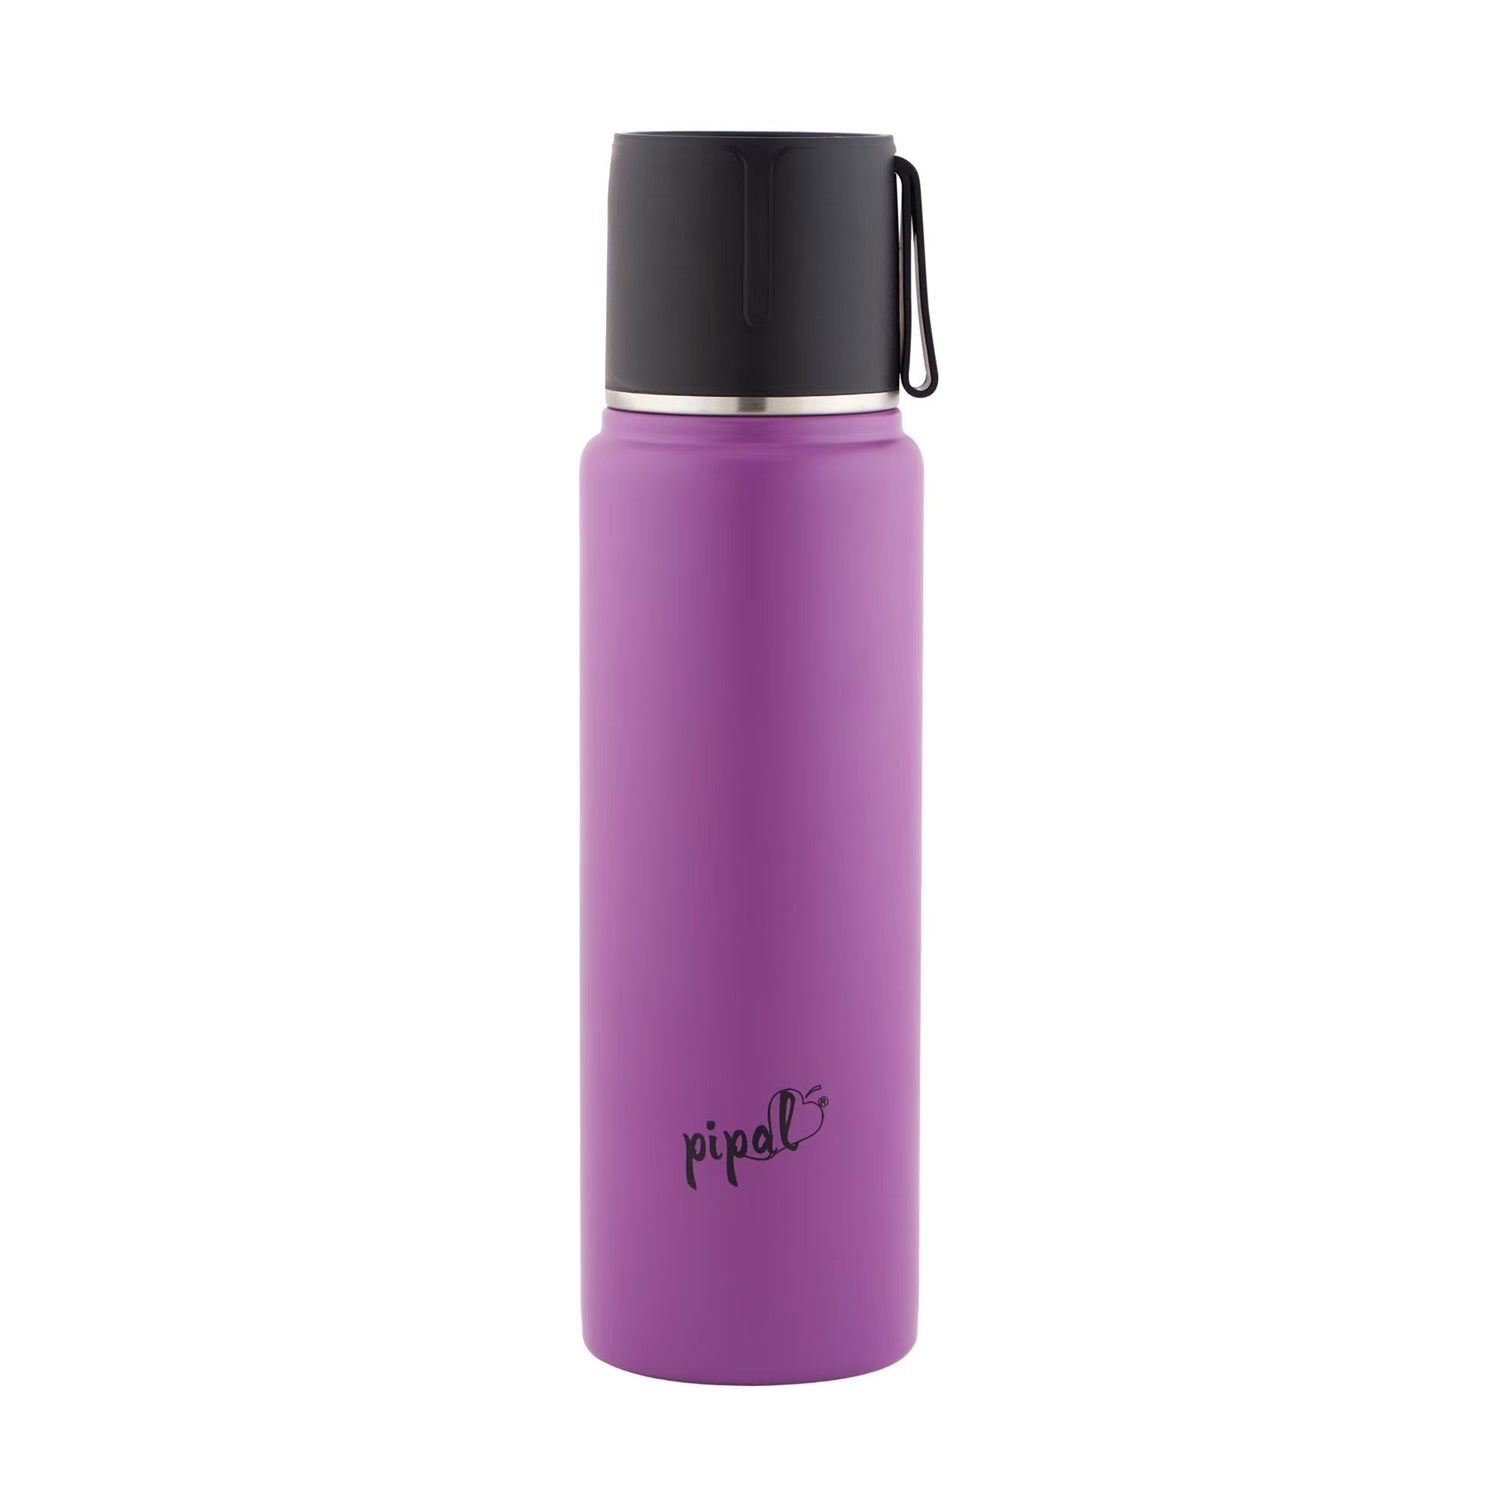 Pipal Zircon Insulated Water Flask